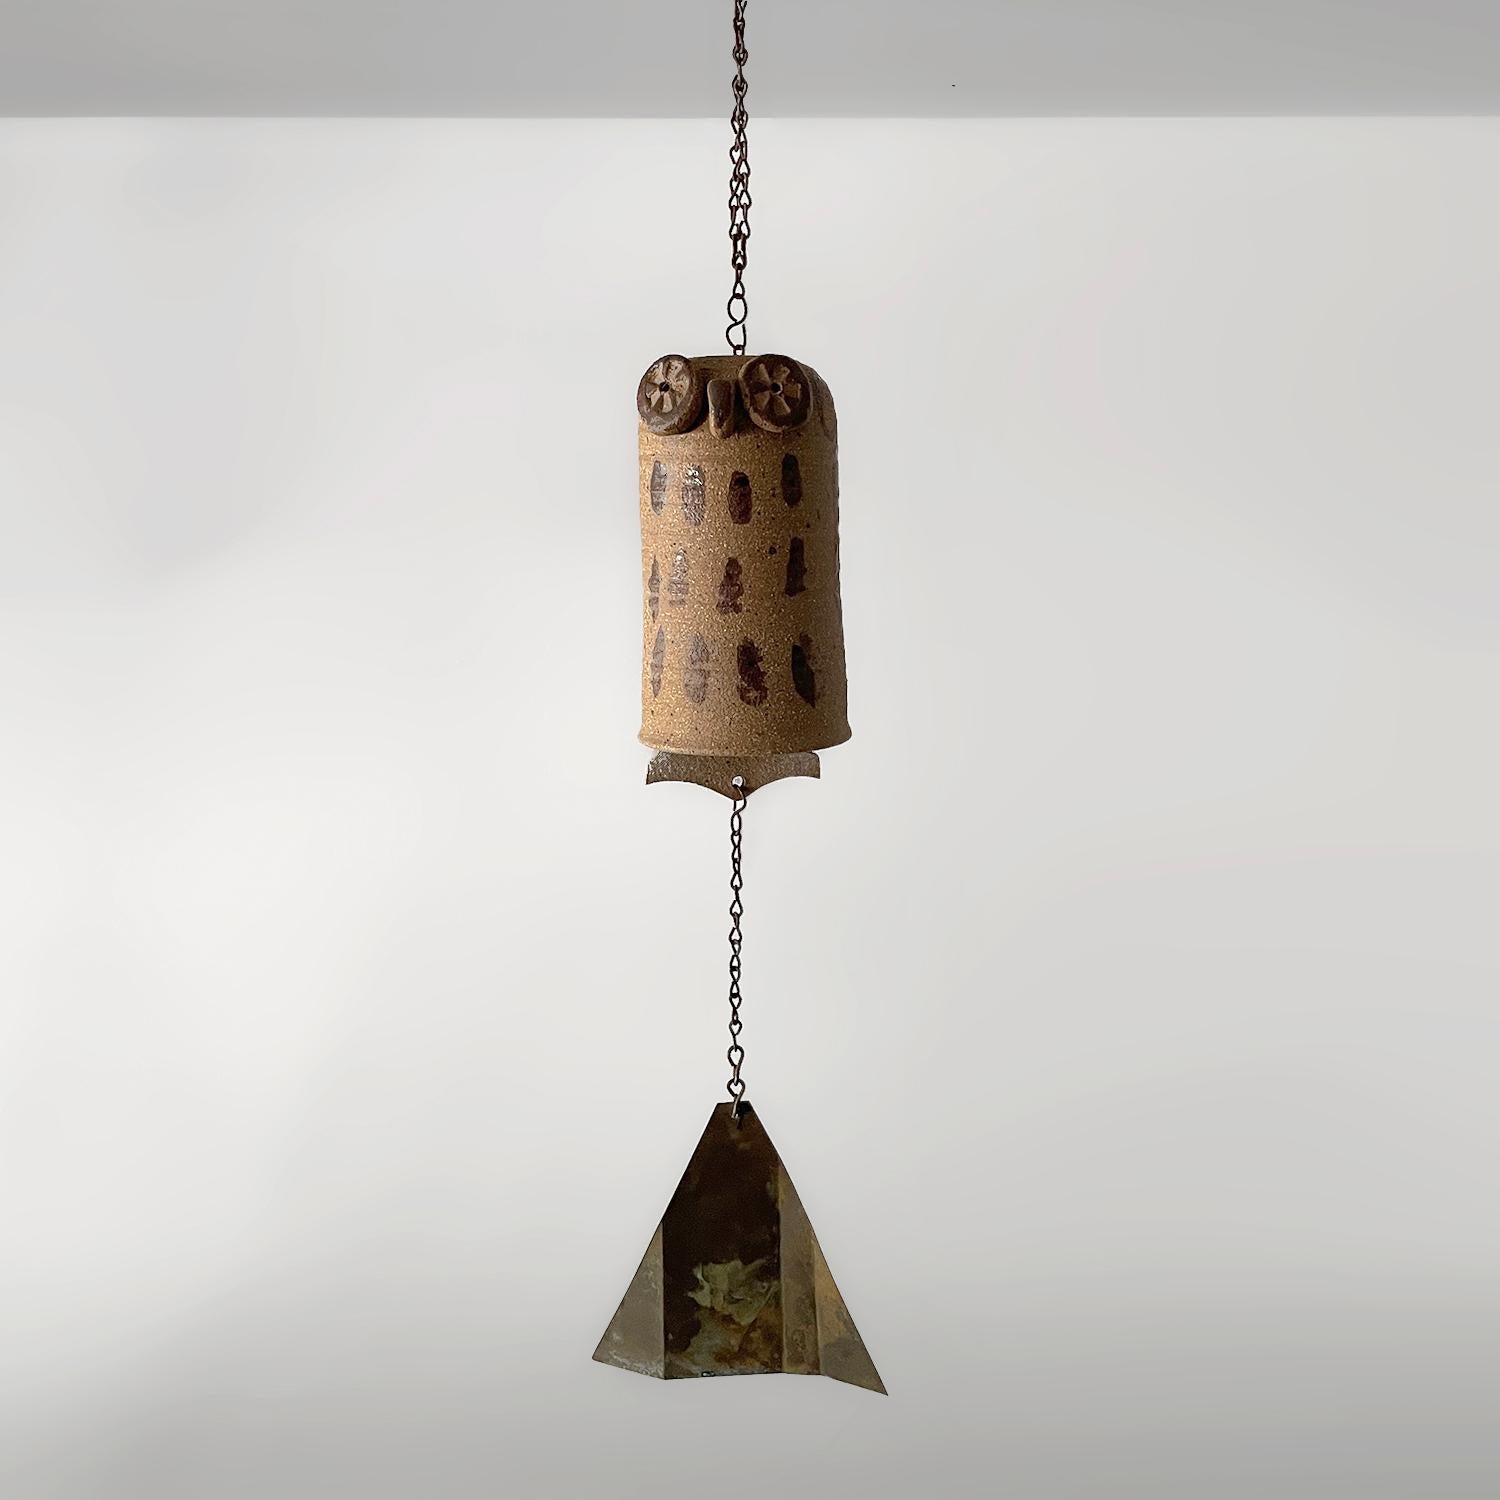 Elevate your outdoor space with this charming artisanal piece 
Organic composition and feel 
Sculpted ceramic stoneware owl is suspended from a metal chain link cord
Light surface markings
Patina from age and use
Perfect present for the